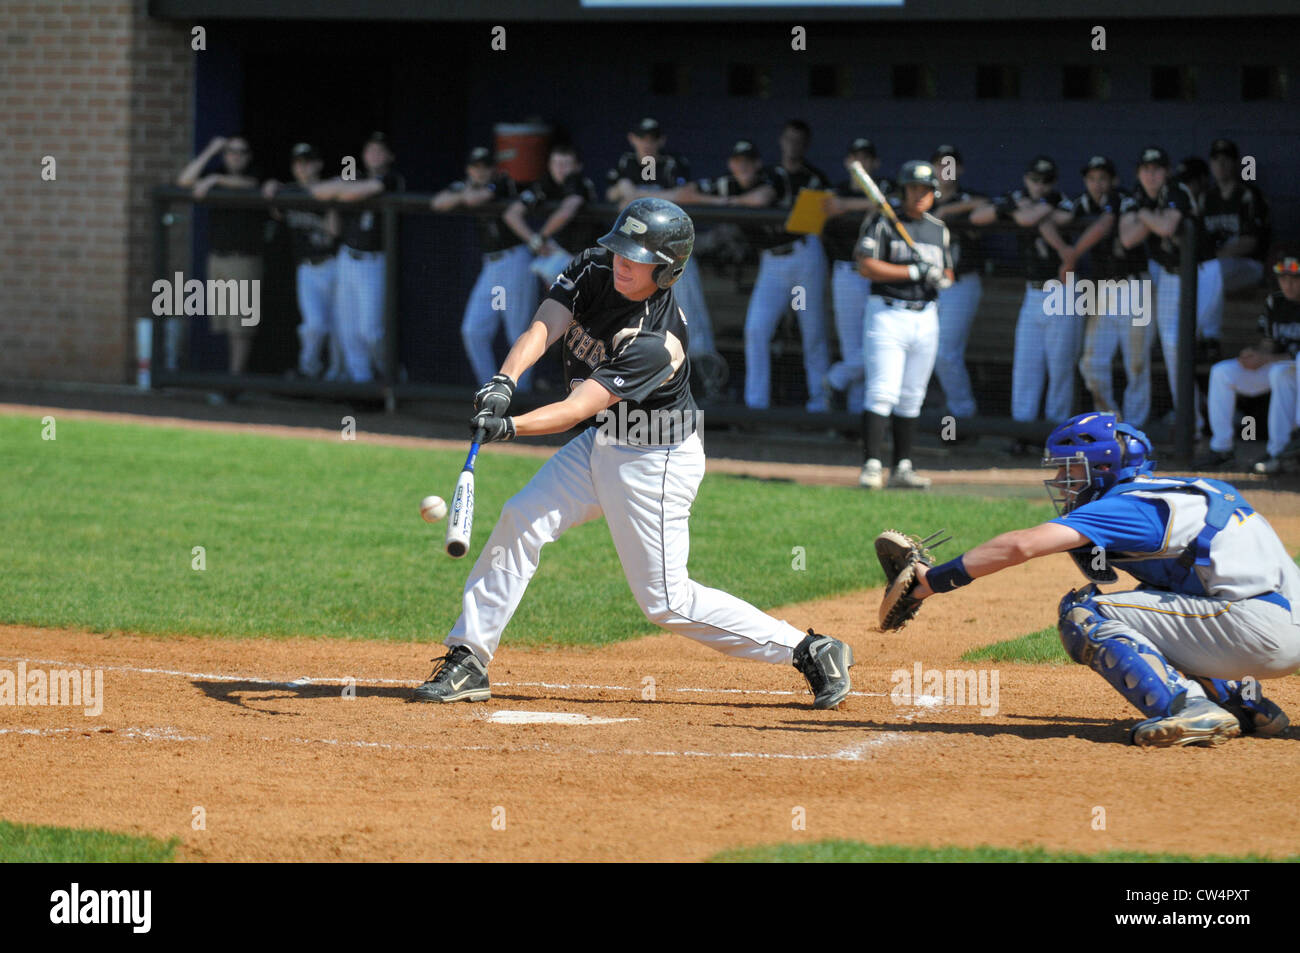 Flex is evident in an aluminum bat prior to contact by a batter during a high school game. Stock Photo